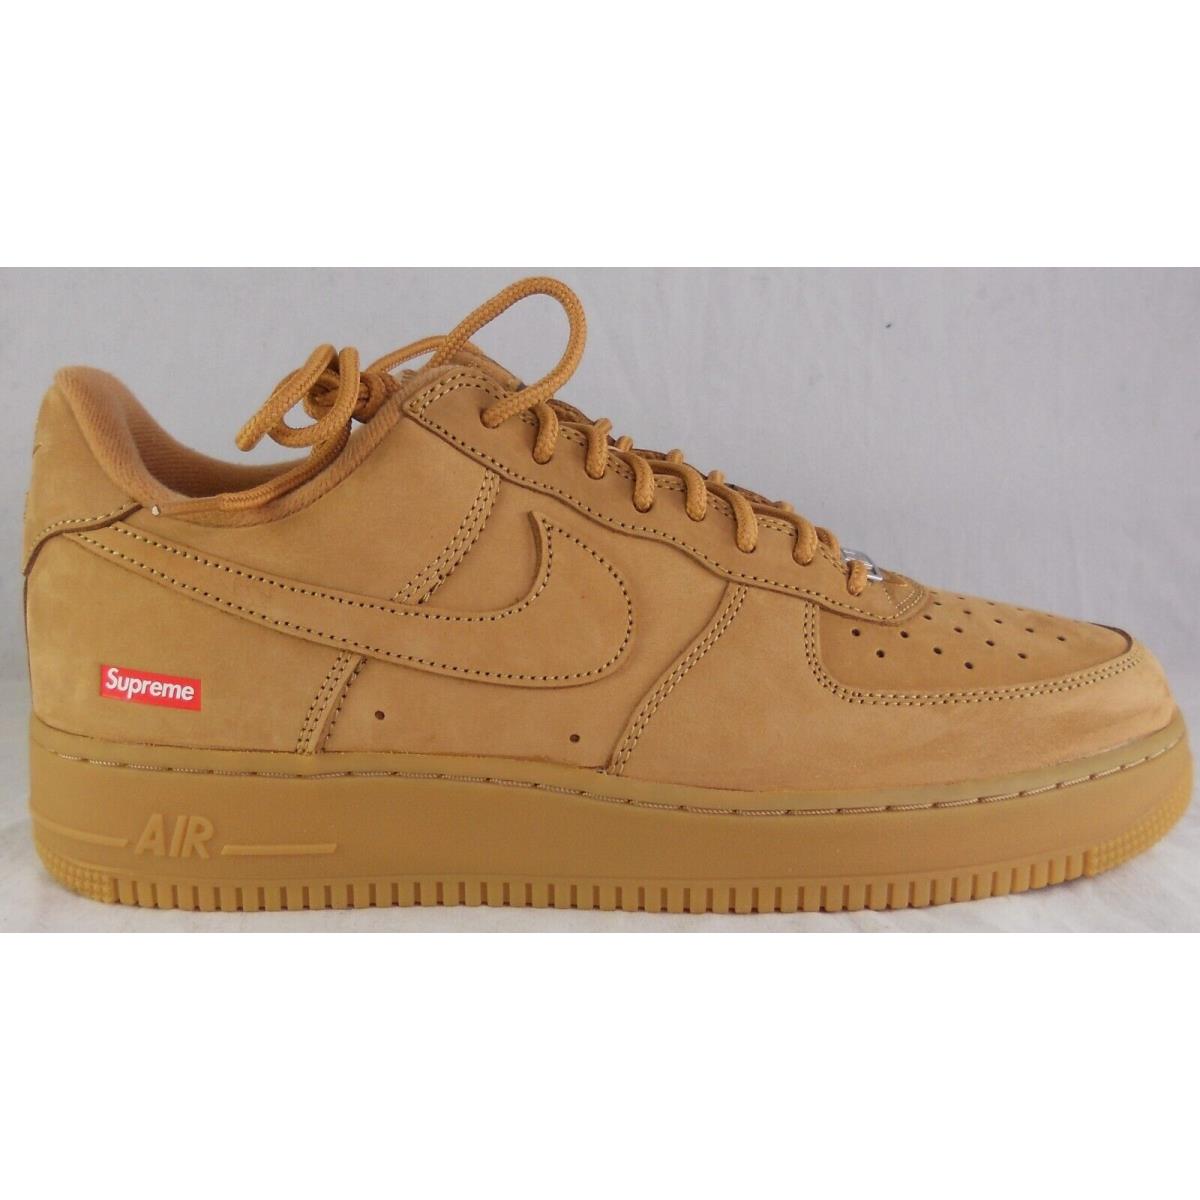 Supreme x Nike Air Force 1 AF1 Low Wheat Shoes Size 11 Mib